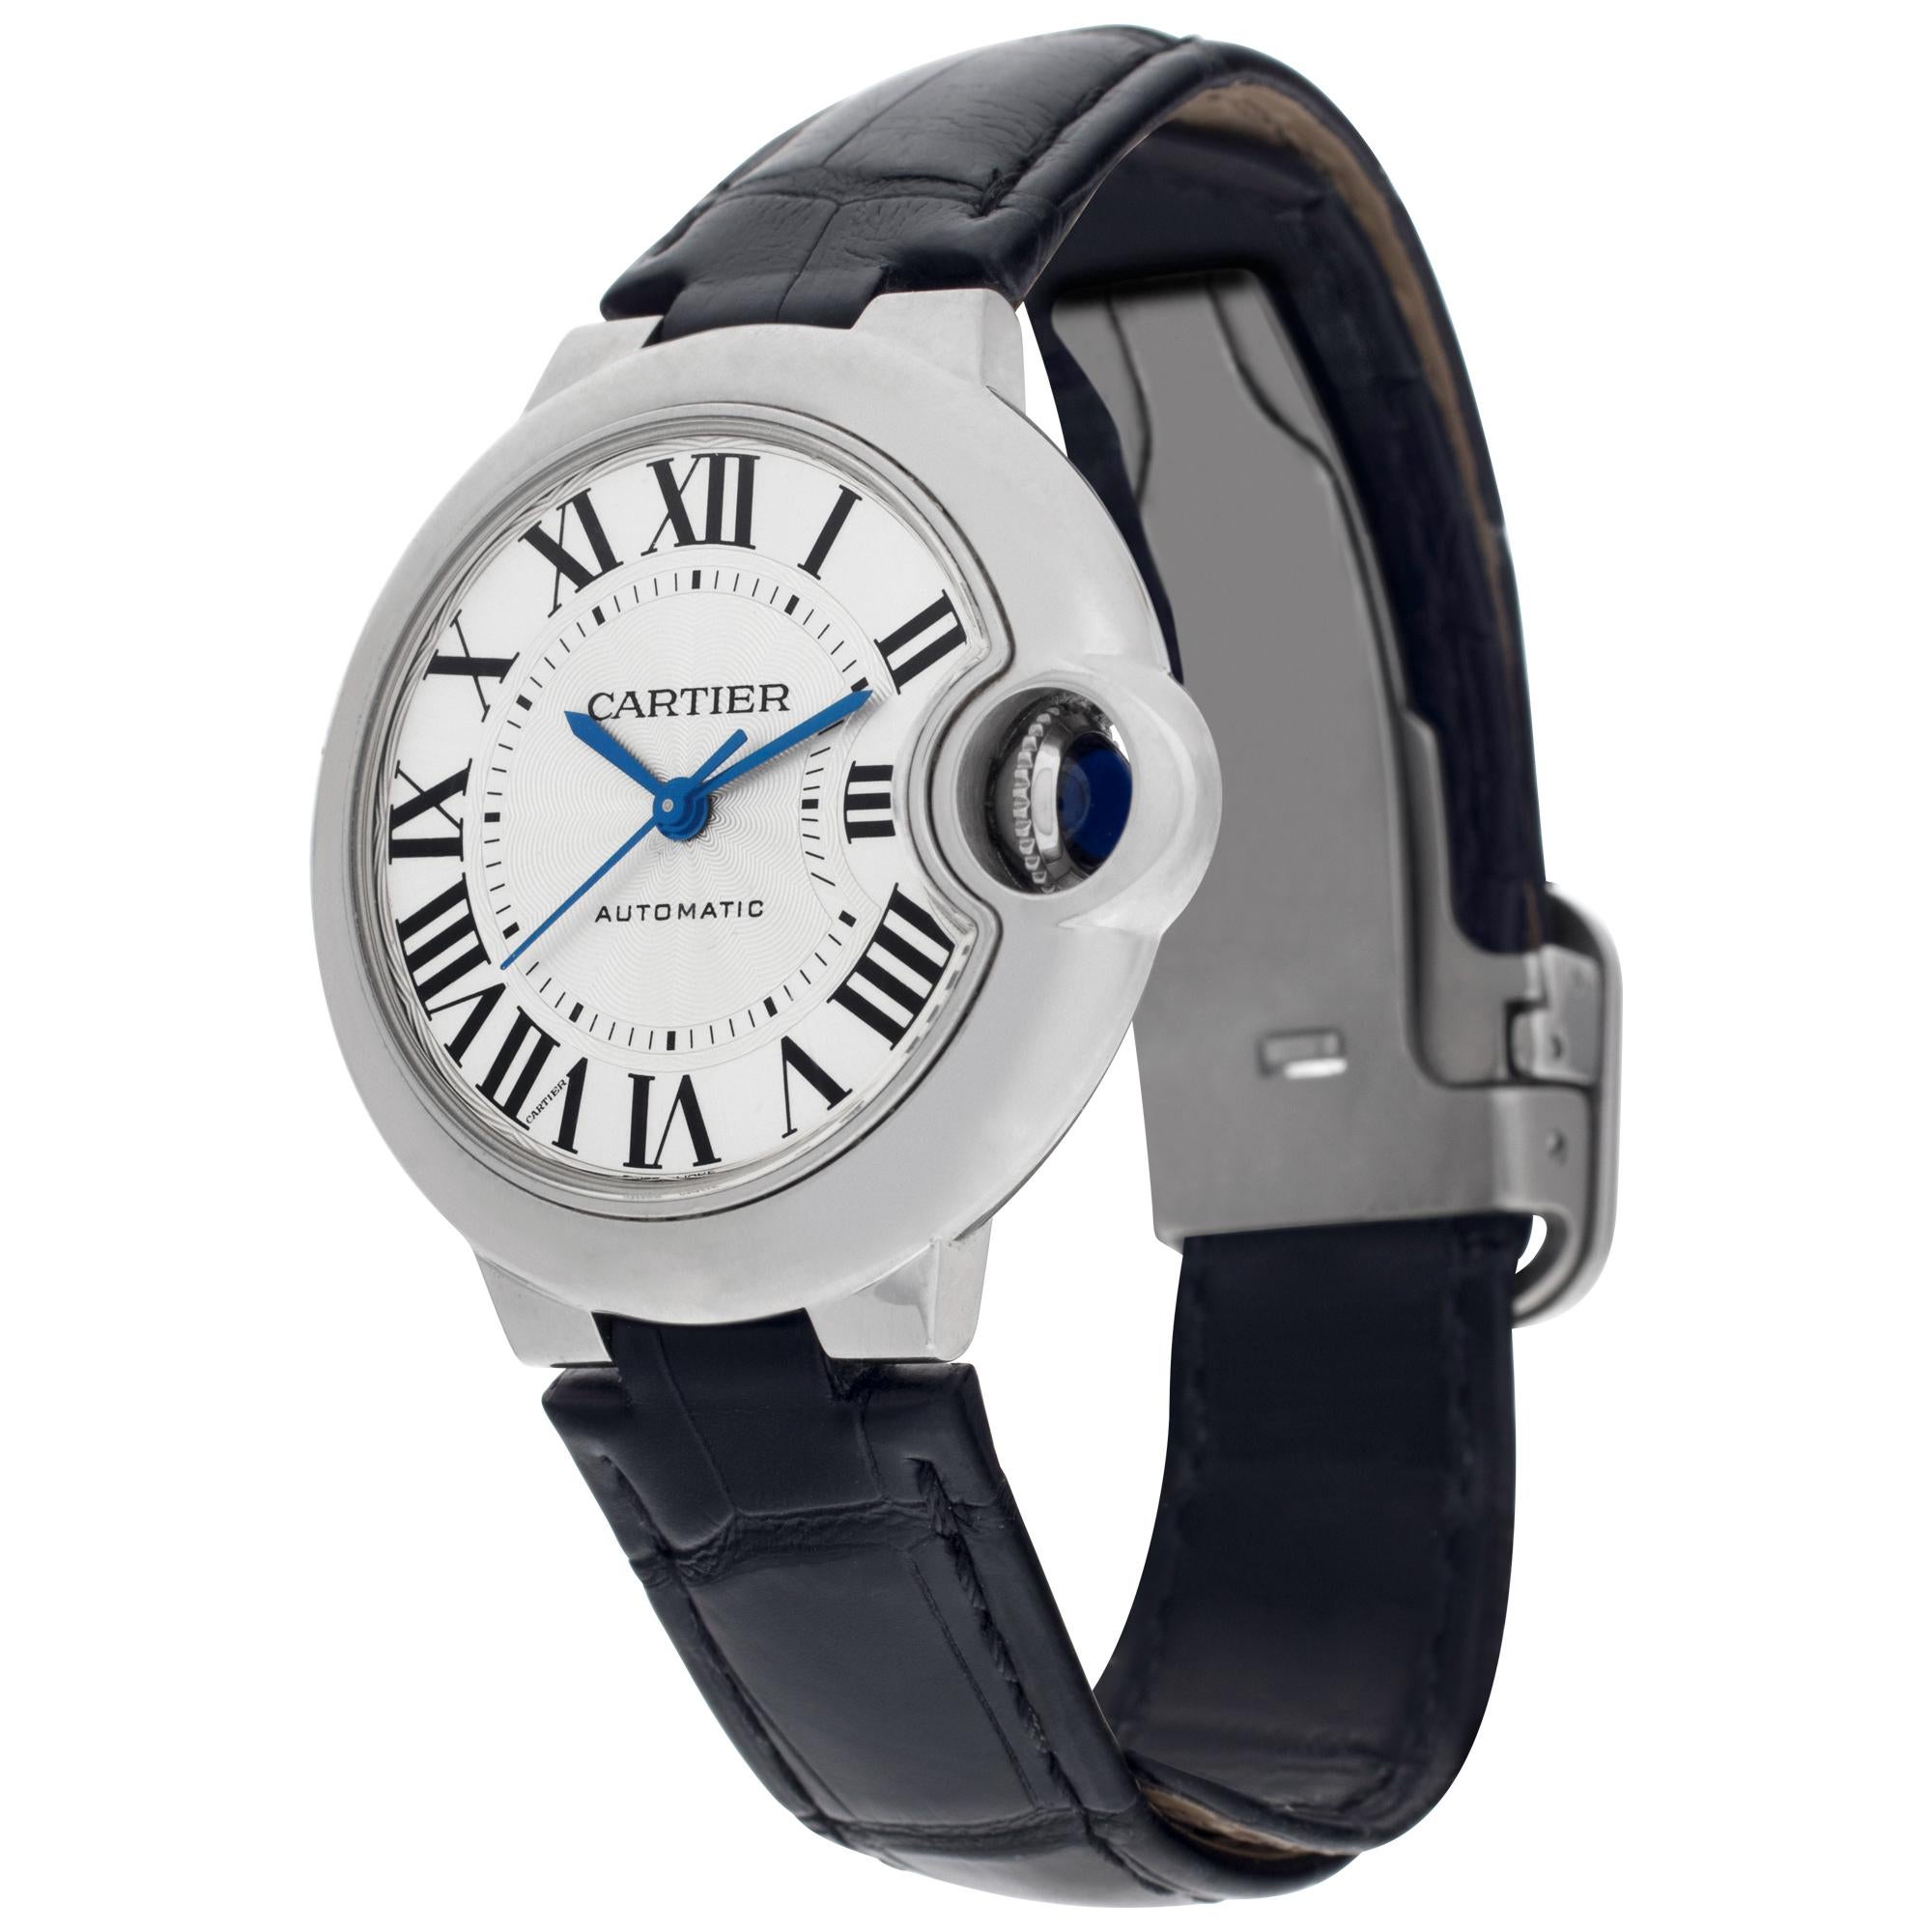 Cartier Ballon Bleu in stainless steel on leather strap. Auto w/ sweep seconds. 32 mm case size. With box. Ref W6920085. Fine Pre-owned Cartier Watch.

Certified preowned Classic Cartier Ballon Bleu W6920085 watch is made out of Stainless steel on a